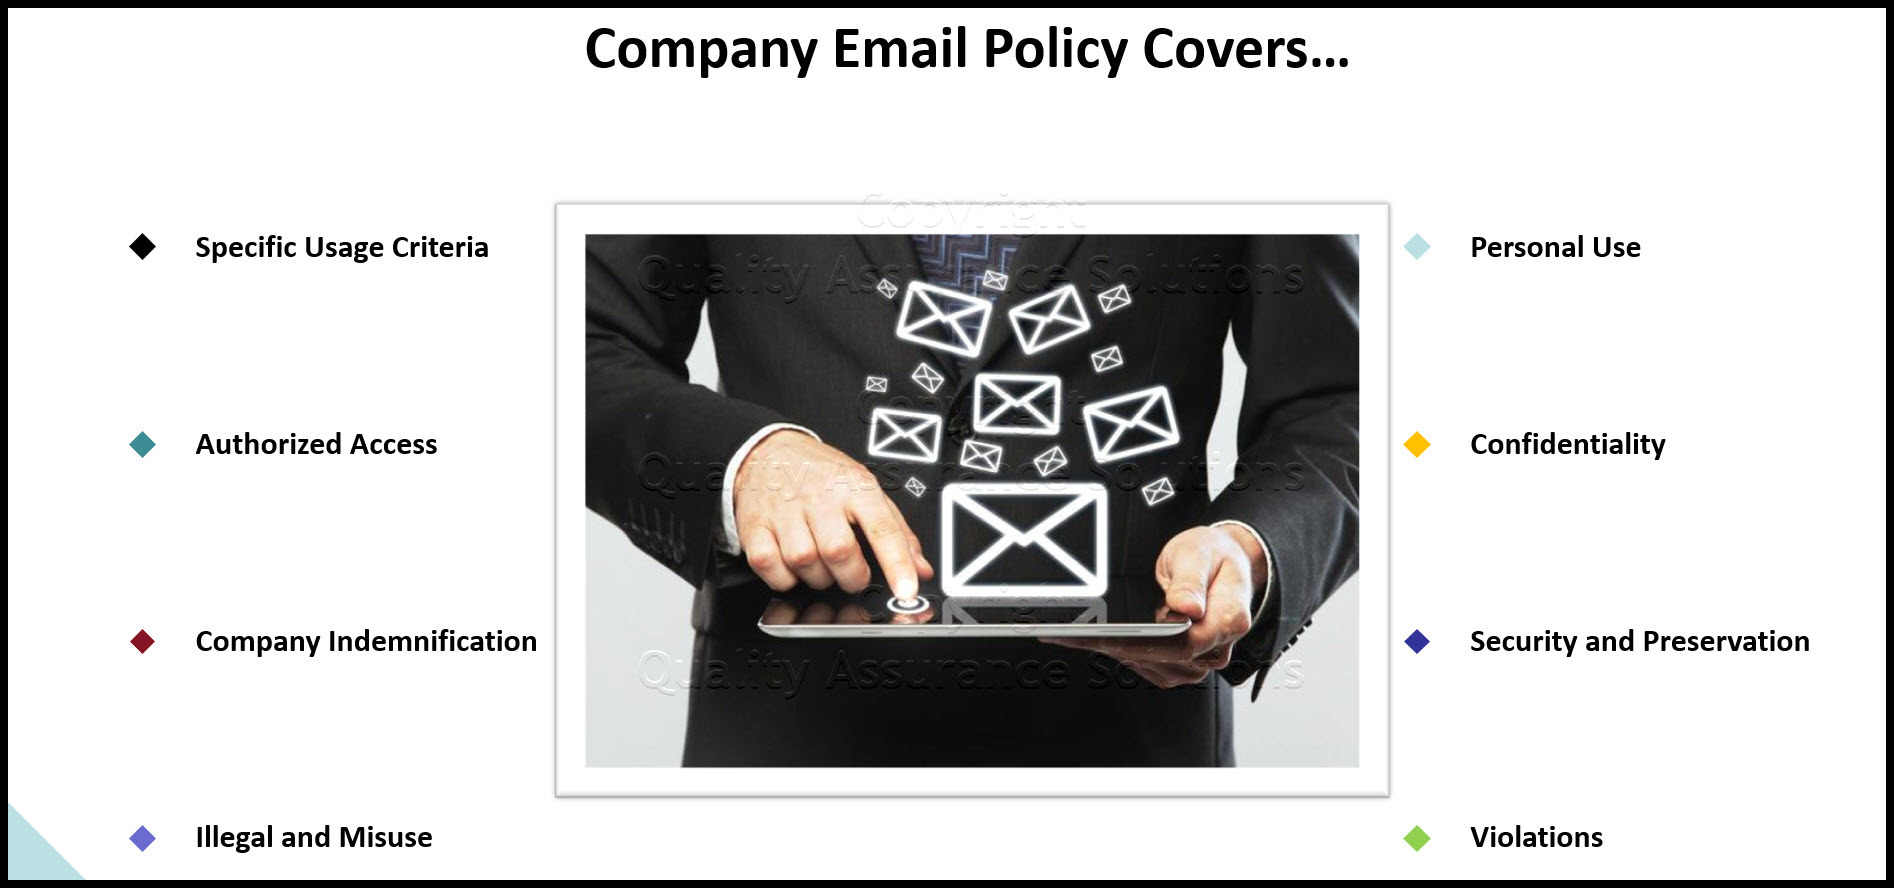 This article covers a detailed corporate email policy. You can also freely download this policy.